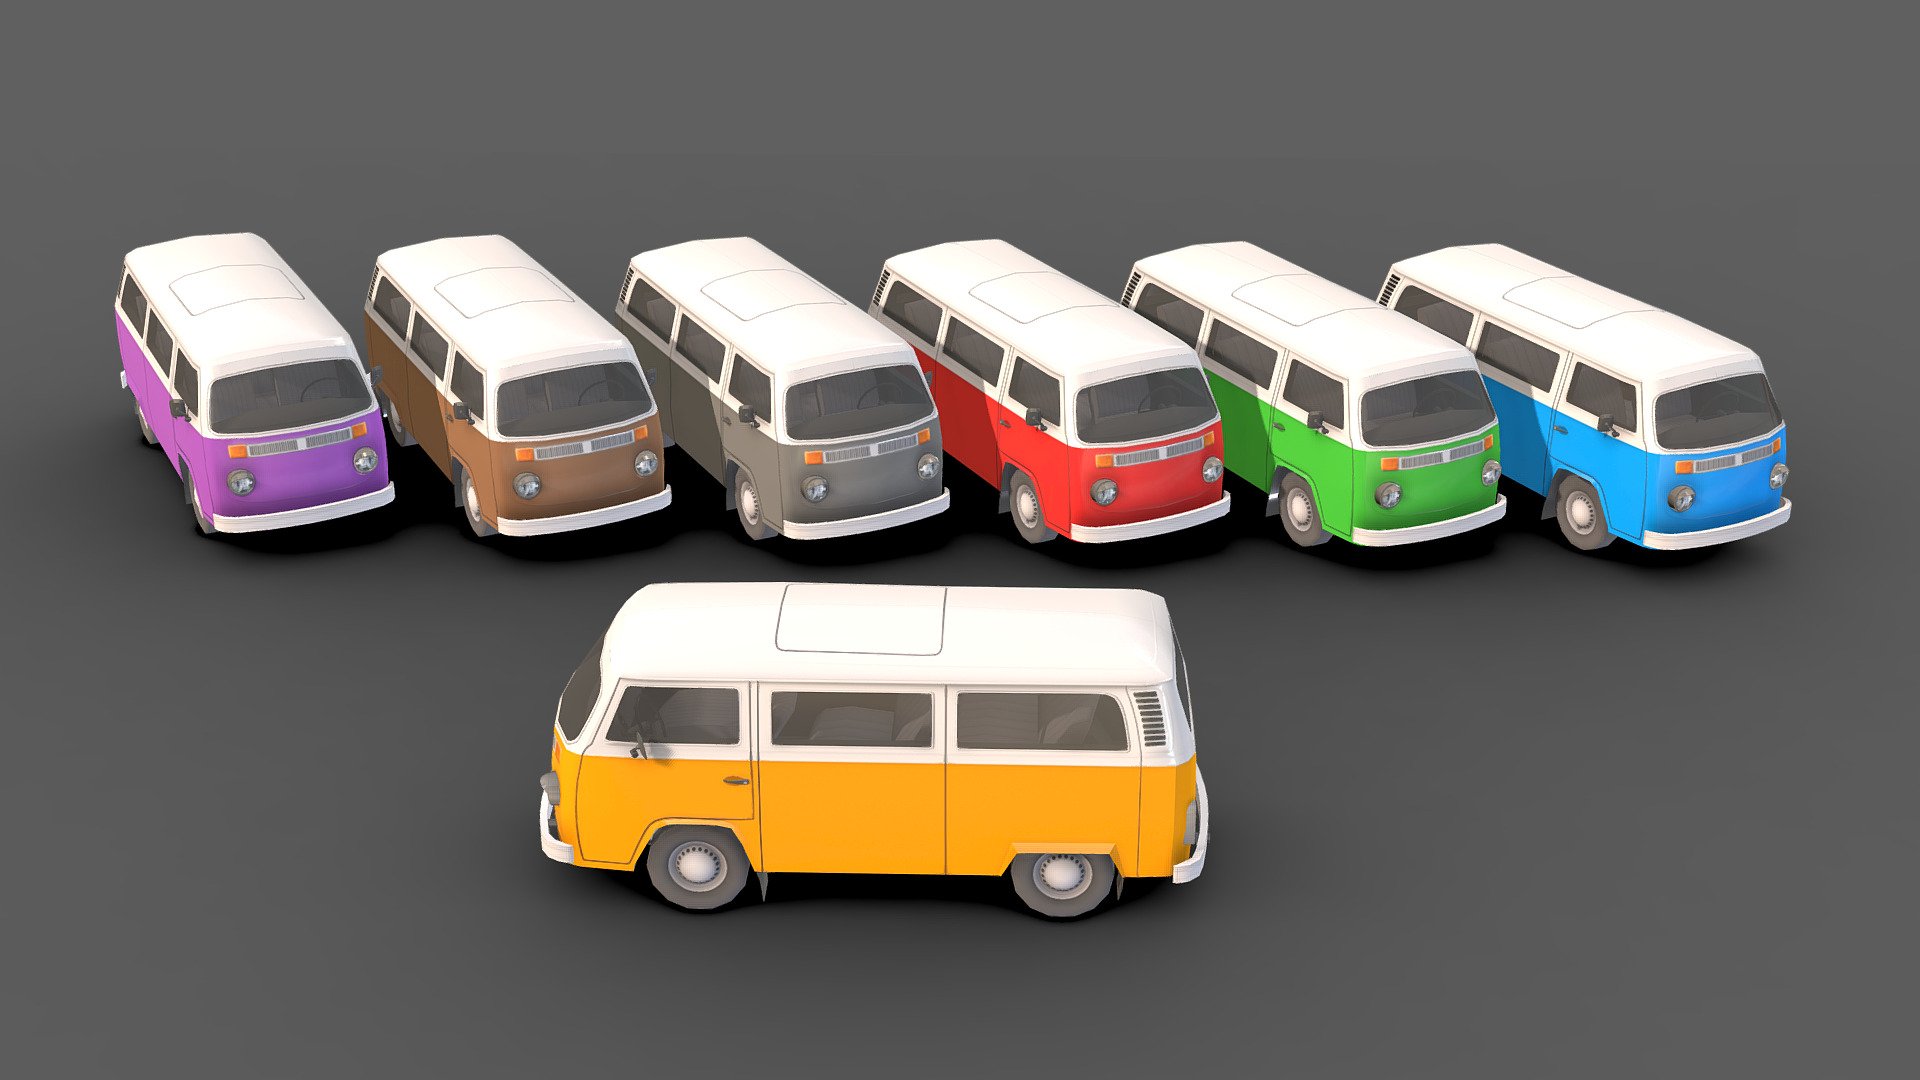 Classic Car # 9 .

You can use these models in any game and project.

This model is made with order and precision.

Separated parts (bodys . wheels . Steer ).

This car has 7 different colors.

Very Low- Poly.

The interior of this car is very low poly.

Average poly count: 5,000 tris.

Texture size: 2048 / 1024 / 512 (PNG).

It has a UV map texture.

Number of textures: 3.

Number of materials: 4.

Format: Fbx / Obj / 3DMax .

The original files are in the Additional file .

Wait for my new models.. Your friend (Sidra) 3d model